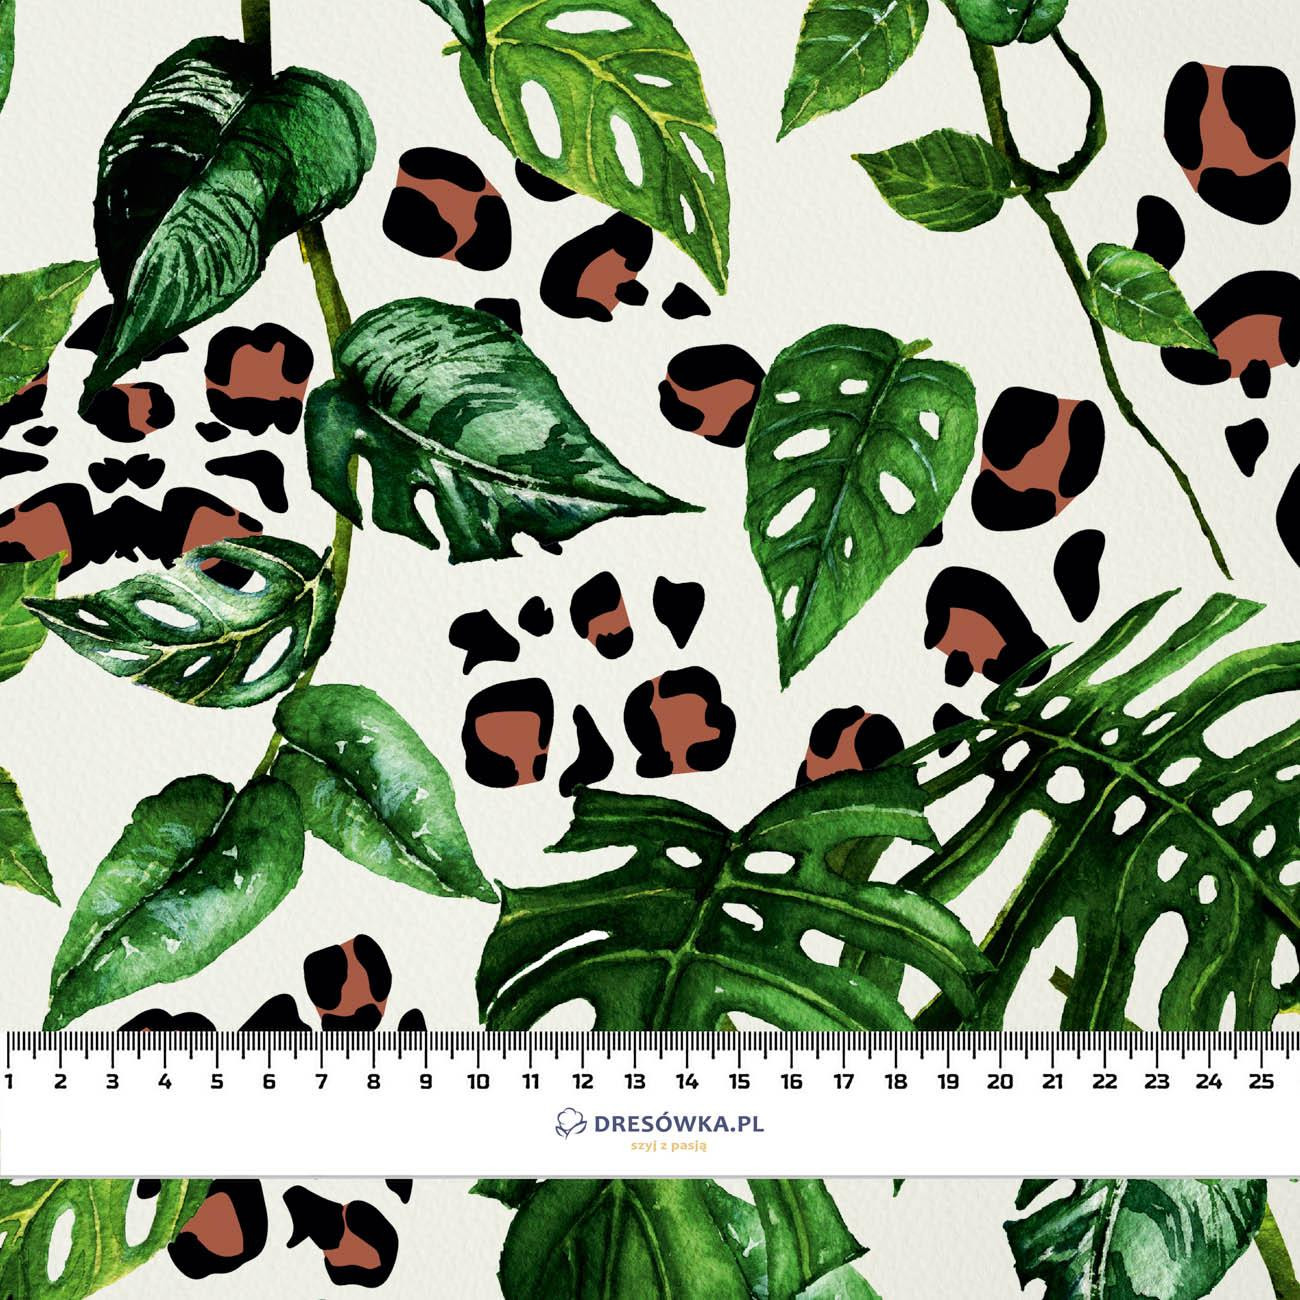 IN THE JUNGLE - Waterproof woven fabric